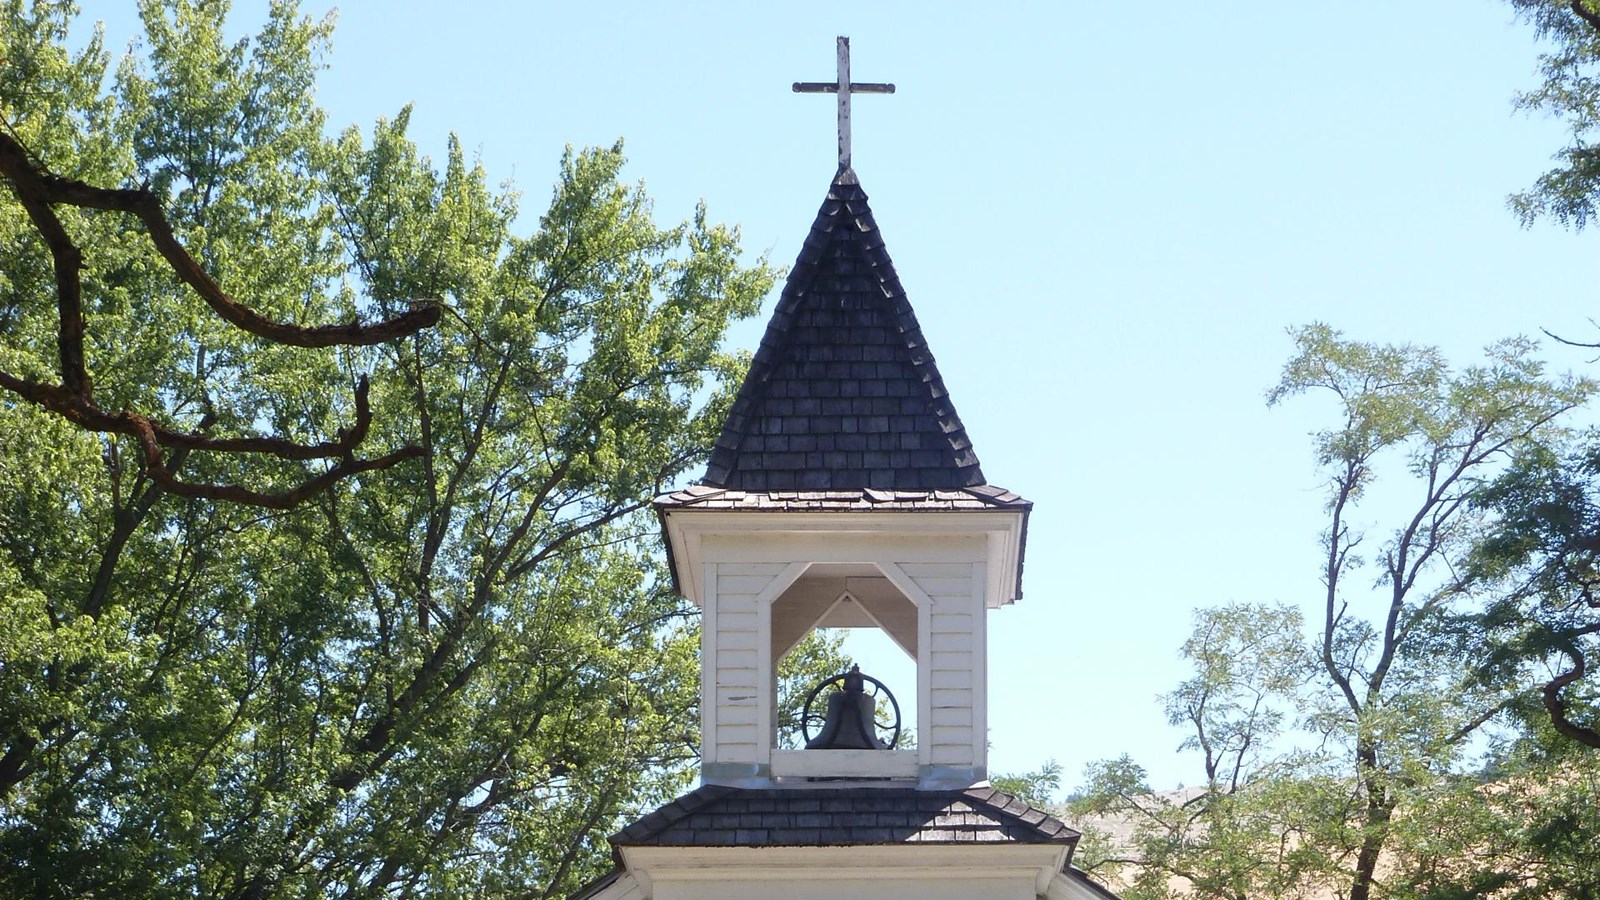 White mission with a church bell under black steeple roof with a cross on top. 